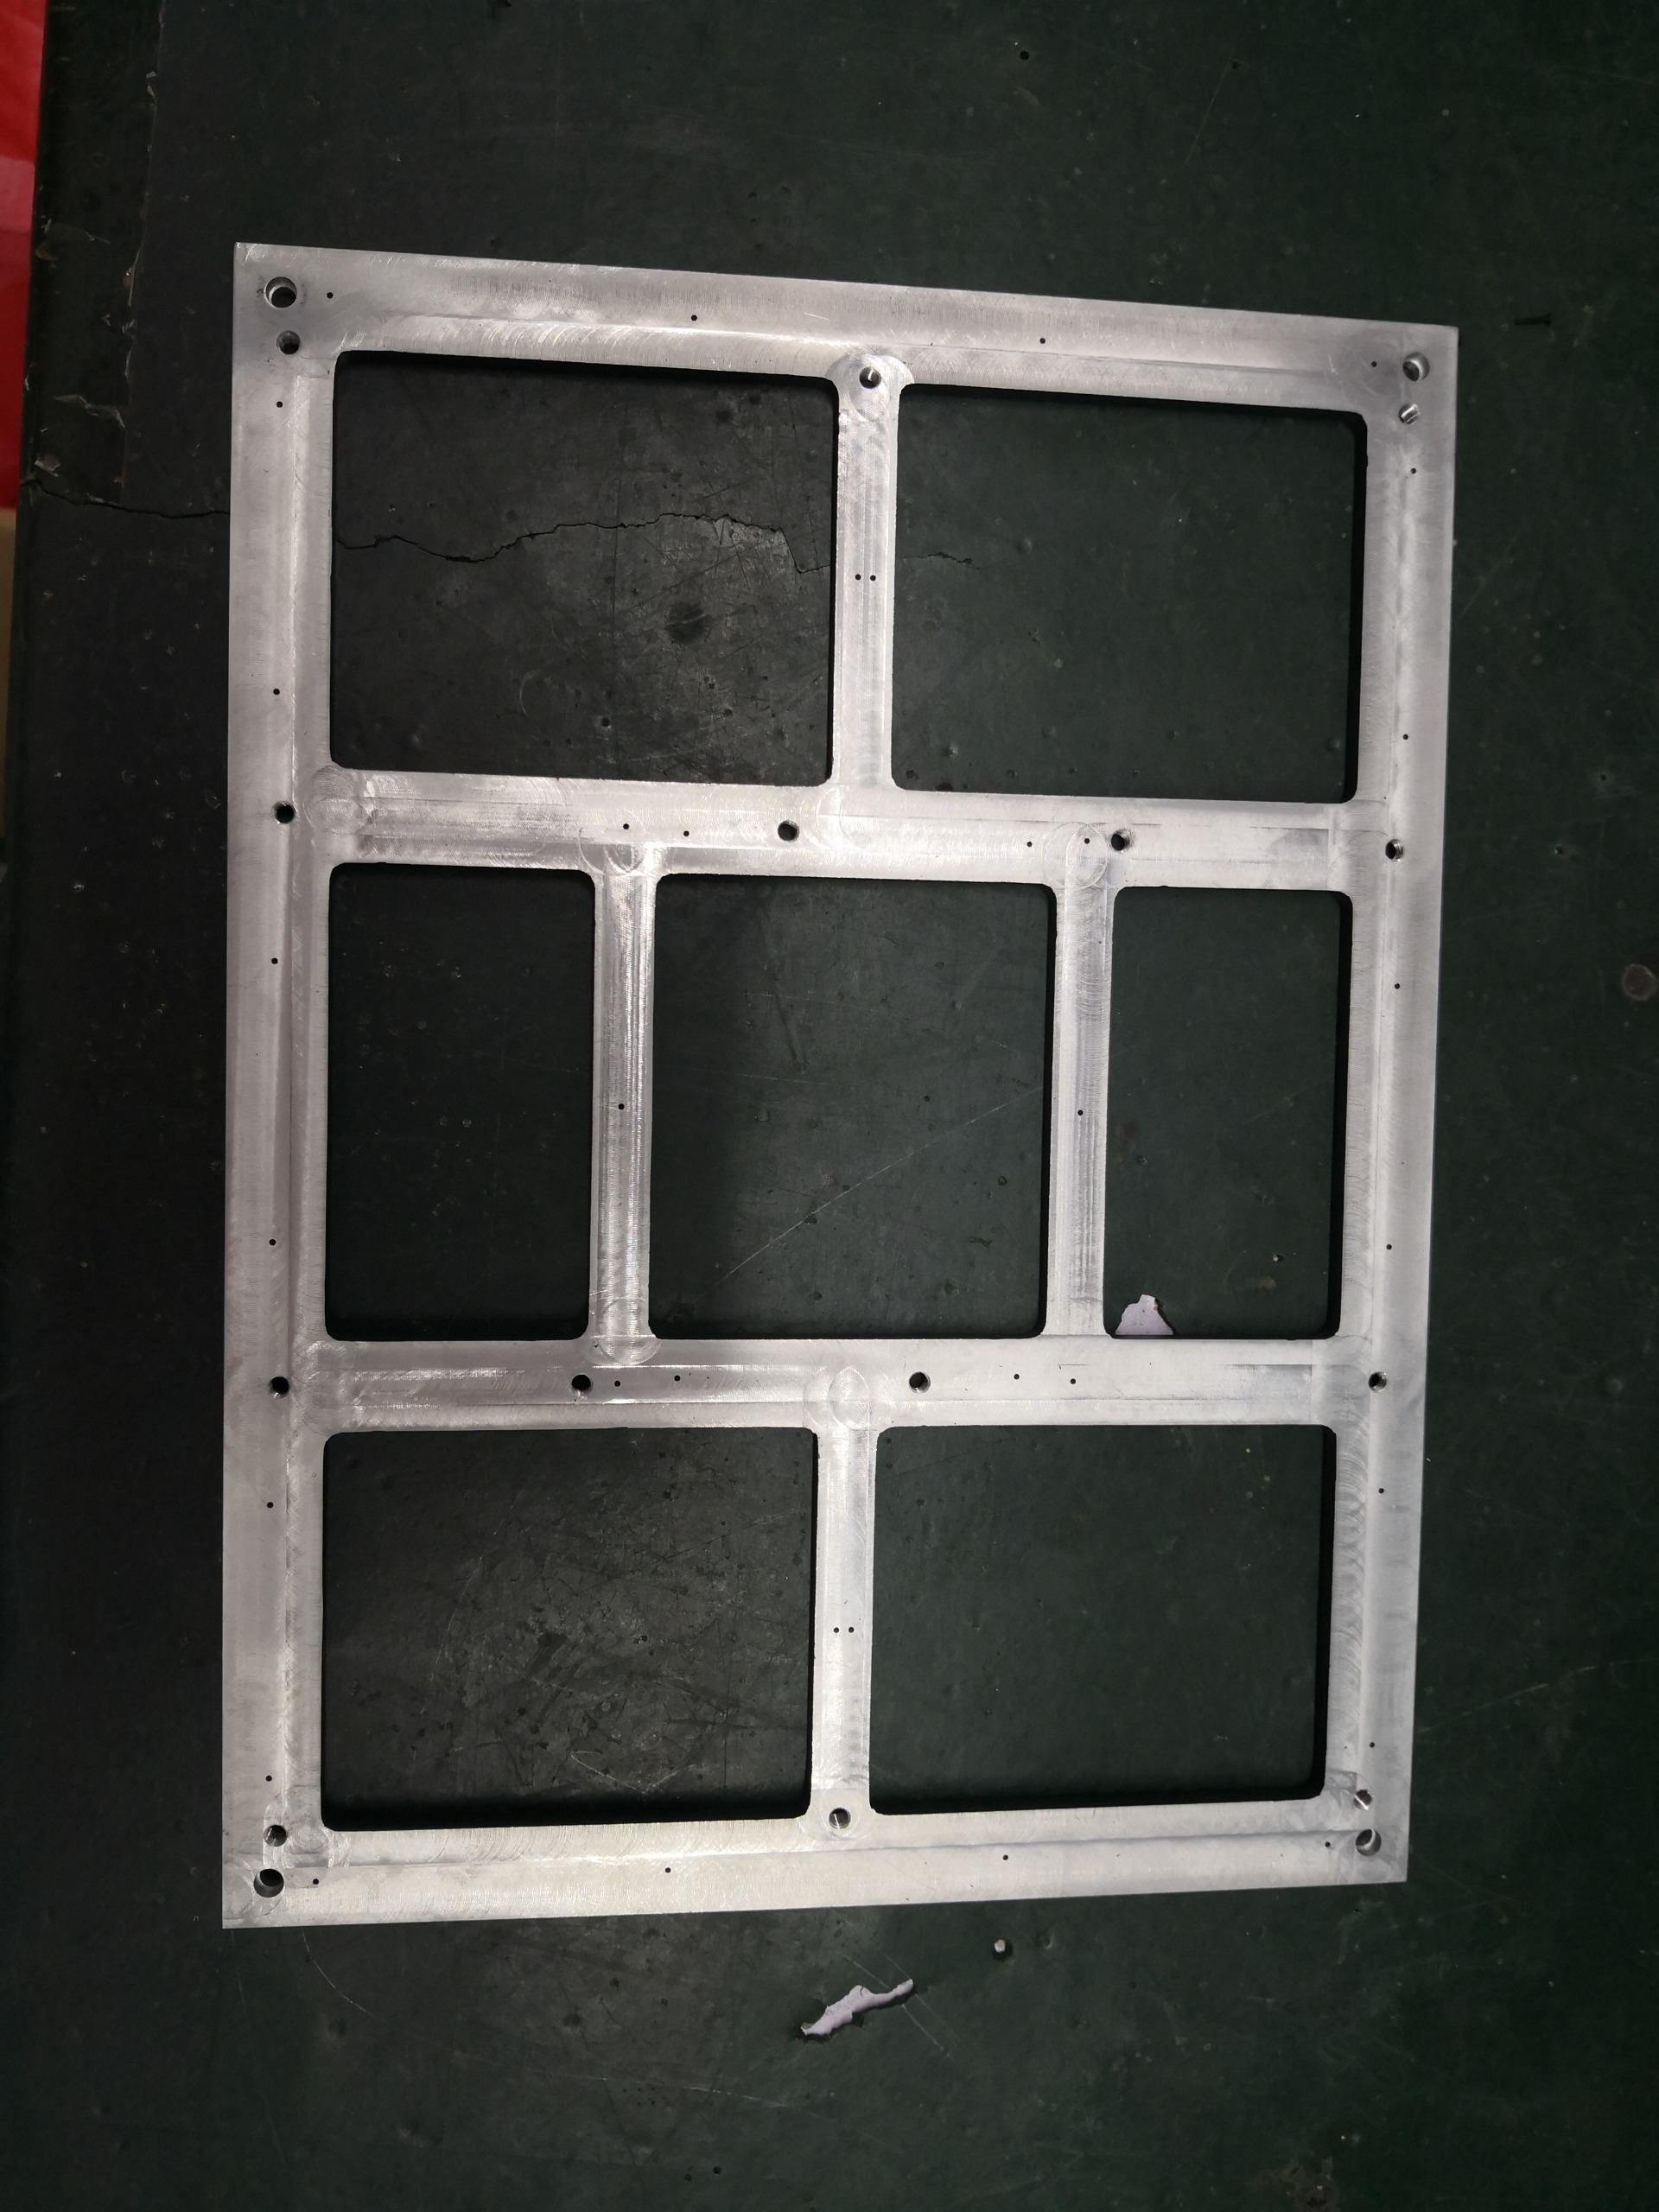 Comparing with plastic moduel frame, die-casting frame is better for heat sinking;